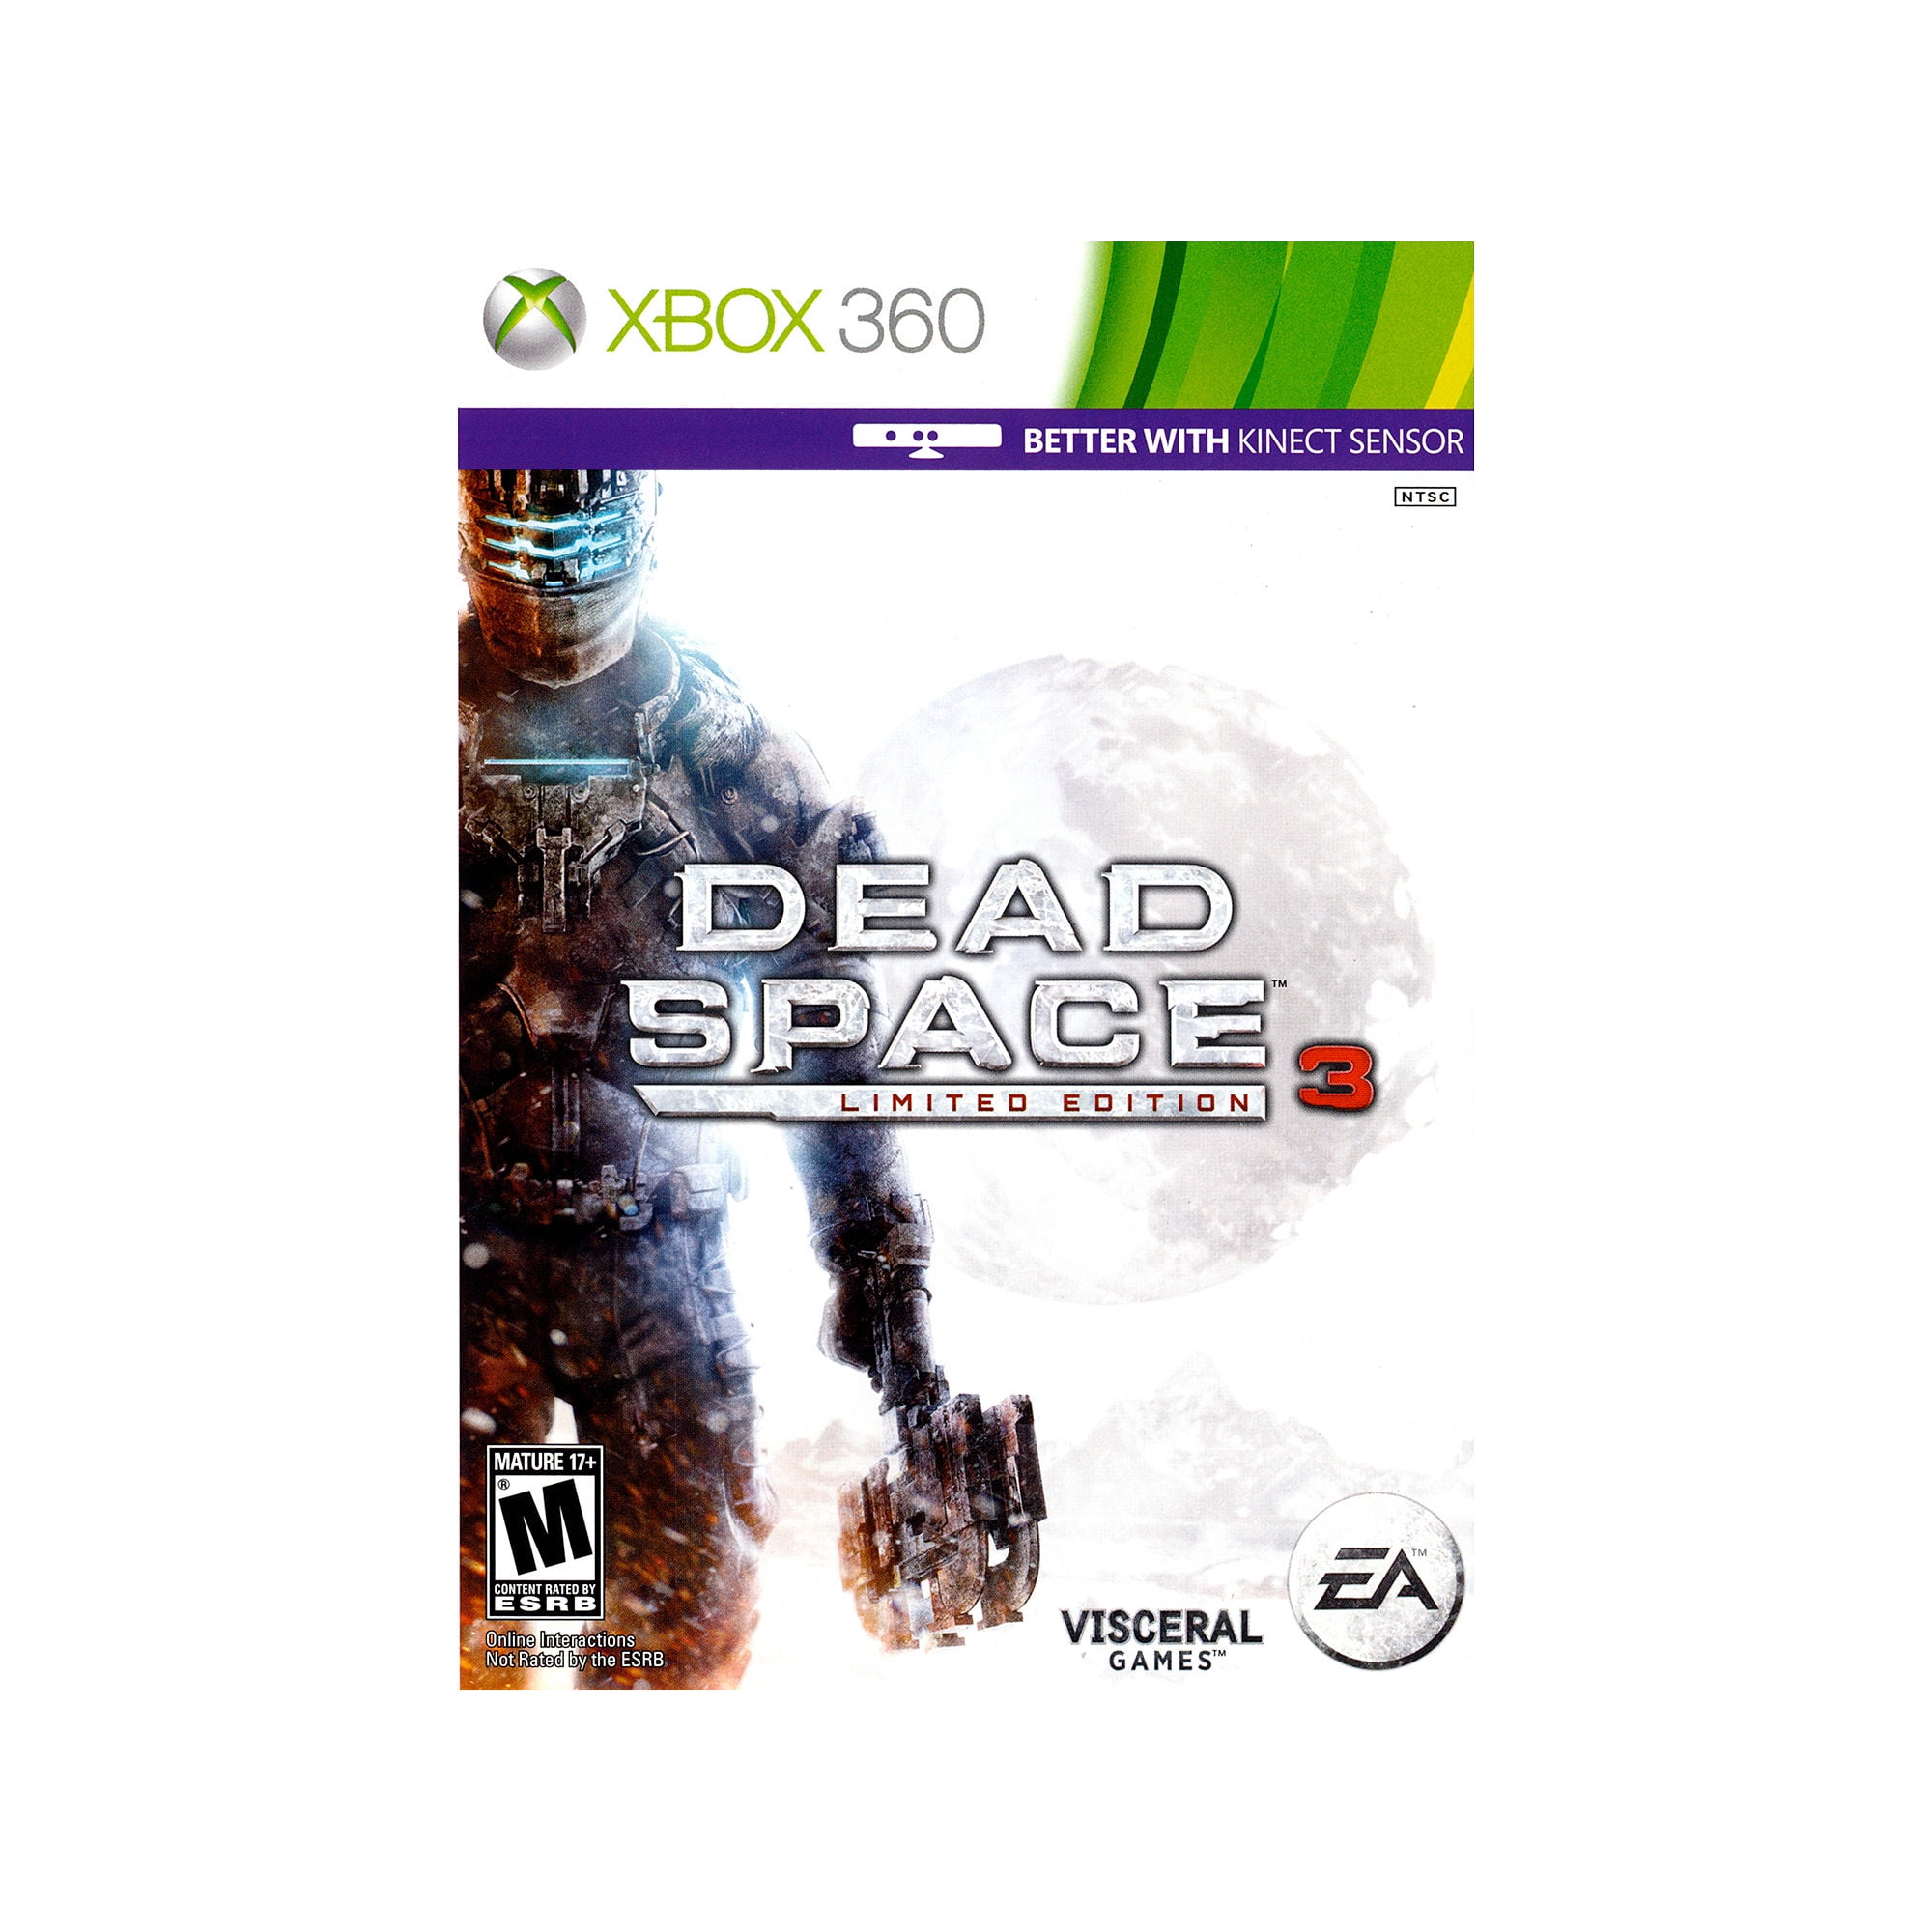 Dead Space 3 Limited, EA, XBOX 360, 014633197235